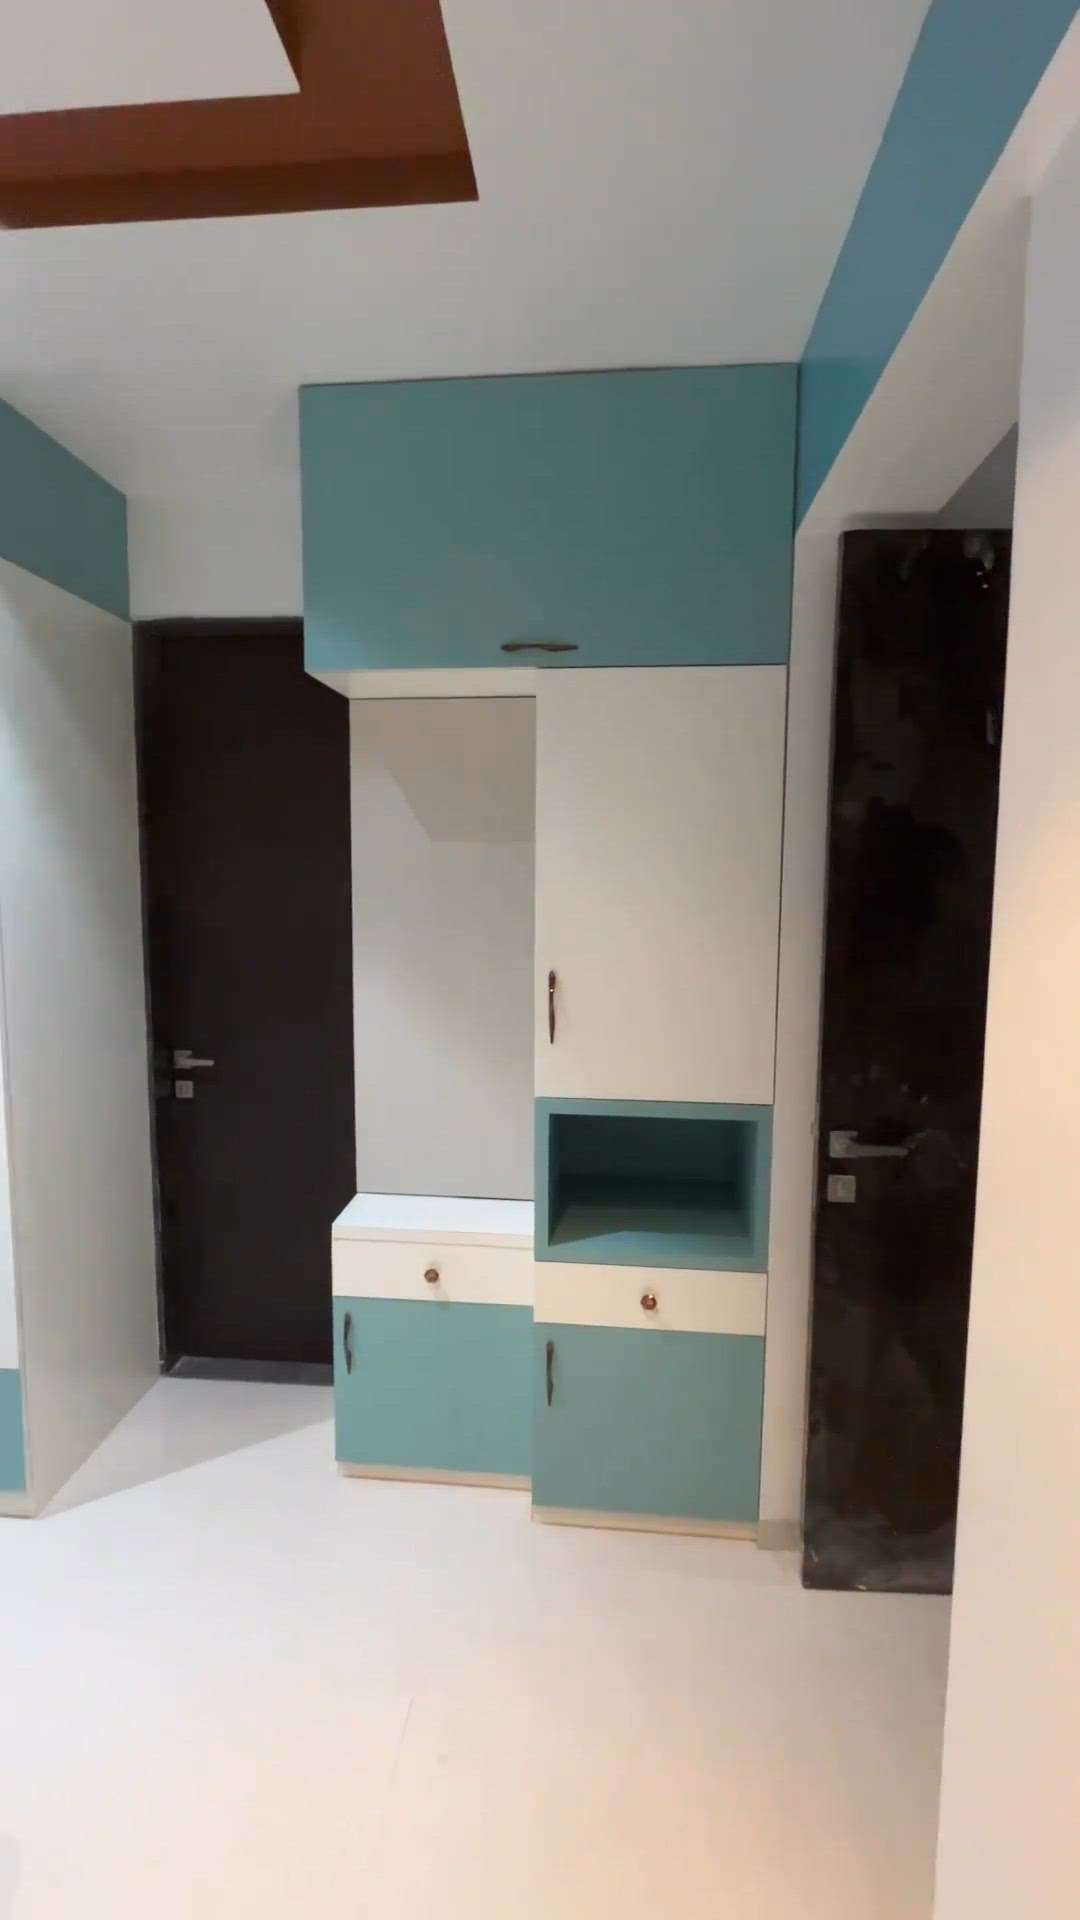 sk furniture work for best quality material and modular furniture full bungalow furniture call for more details8839175846/7869407288 #HomeAutomation  #Ottoman  #BathroomStorage  #KitchenRenovation  #BuffaloGrass  #MasterBedroom